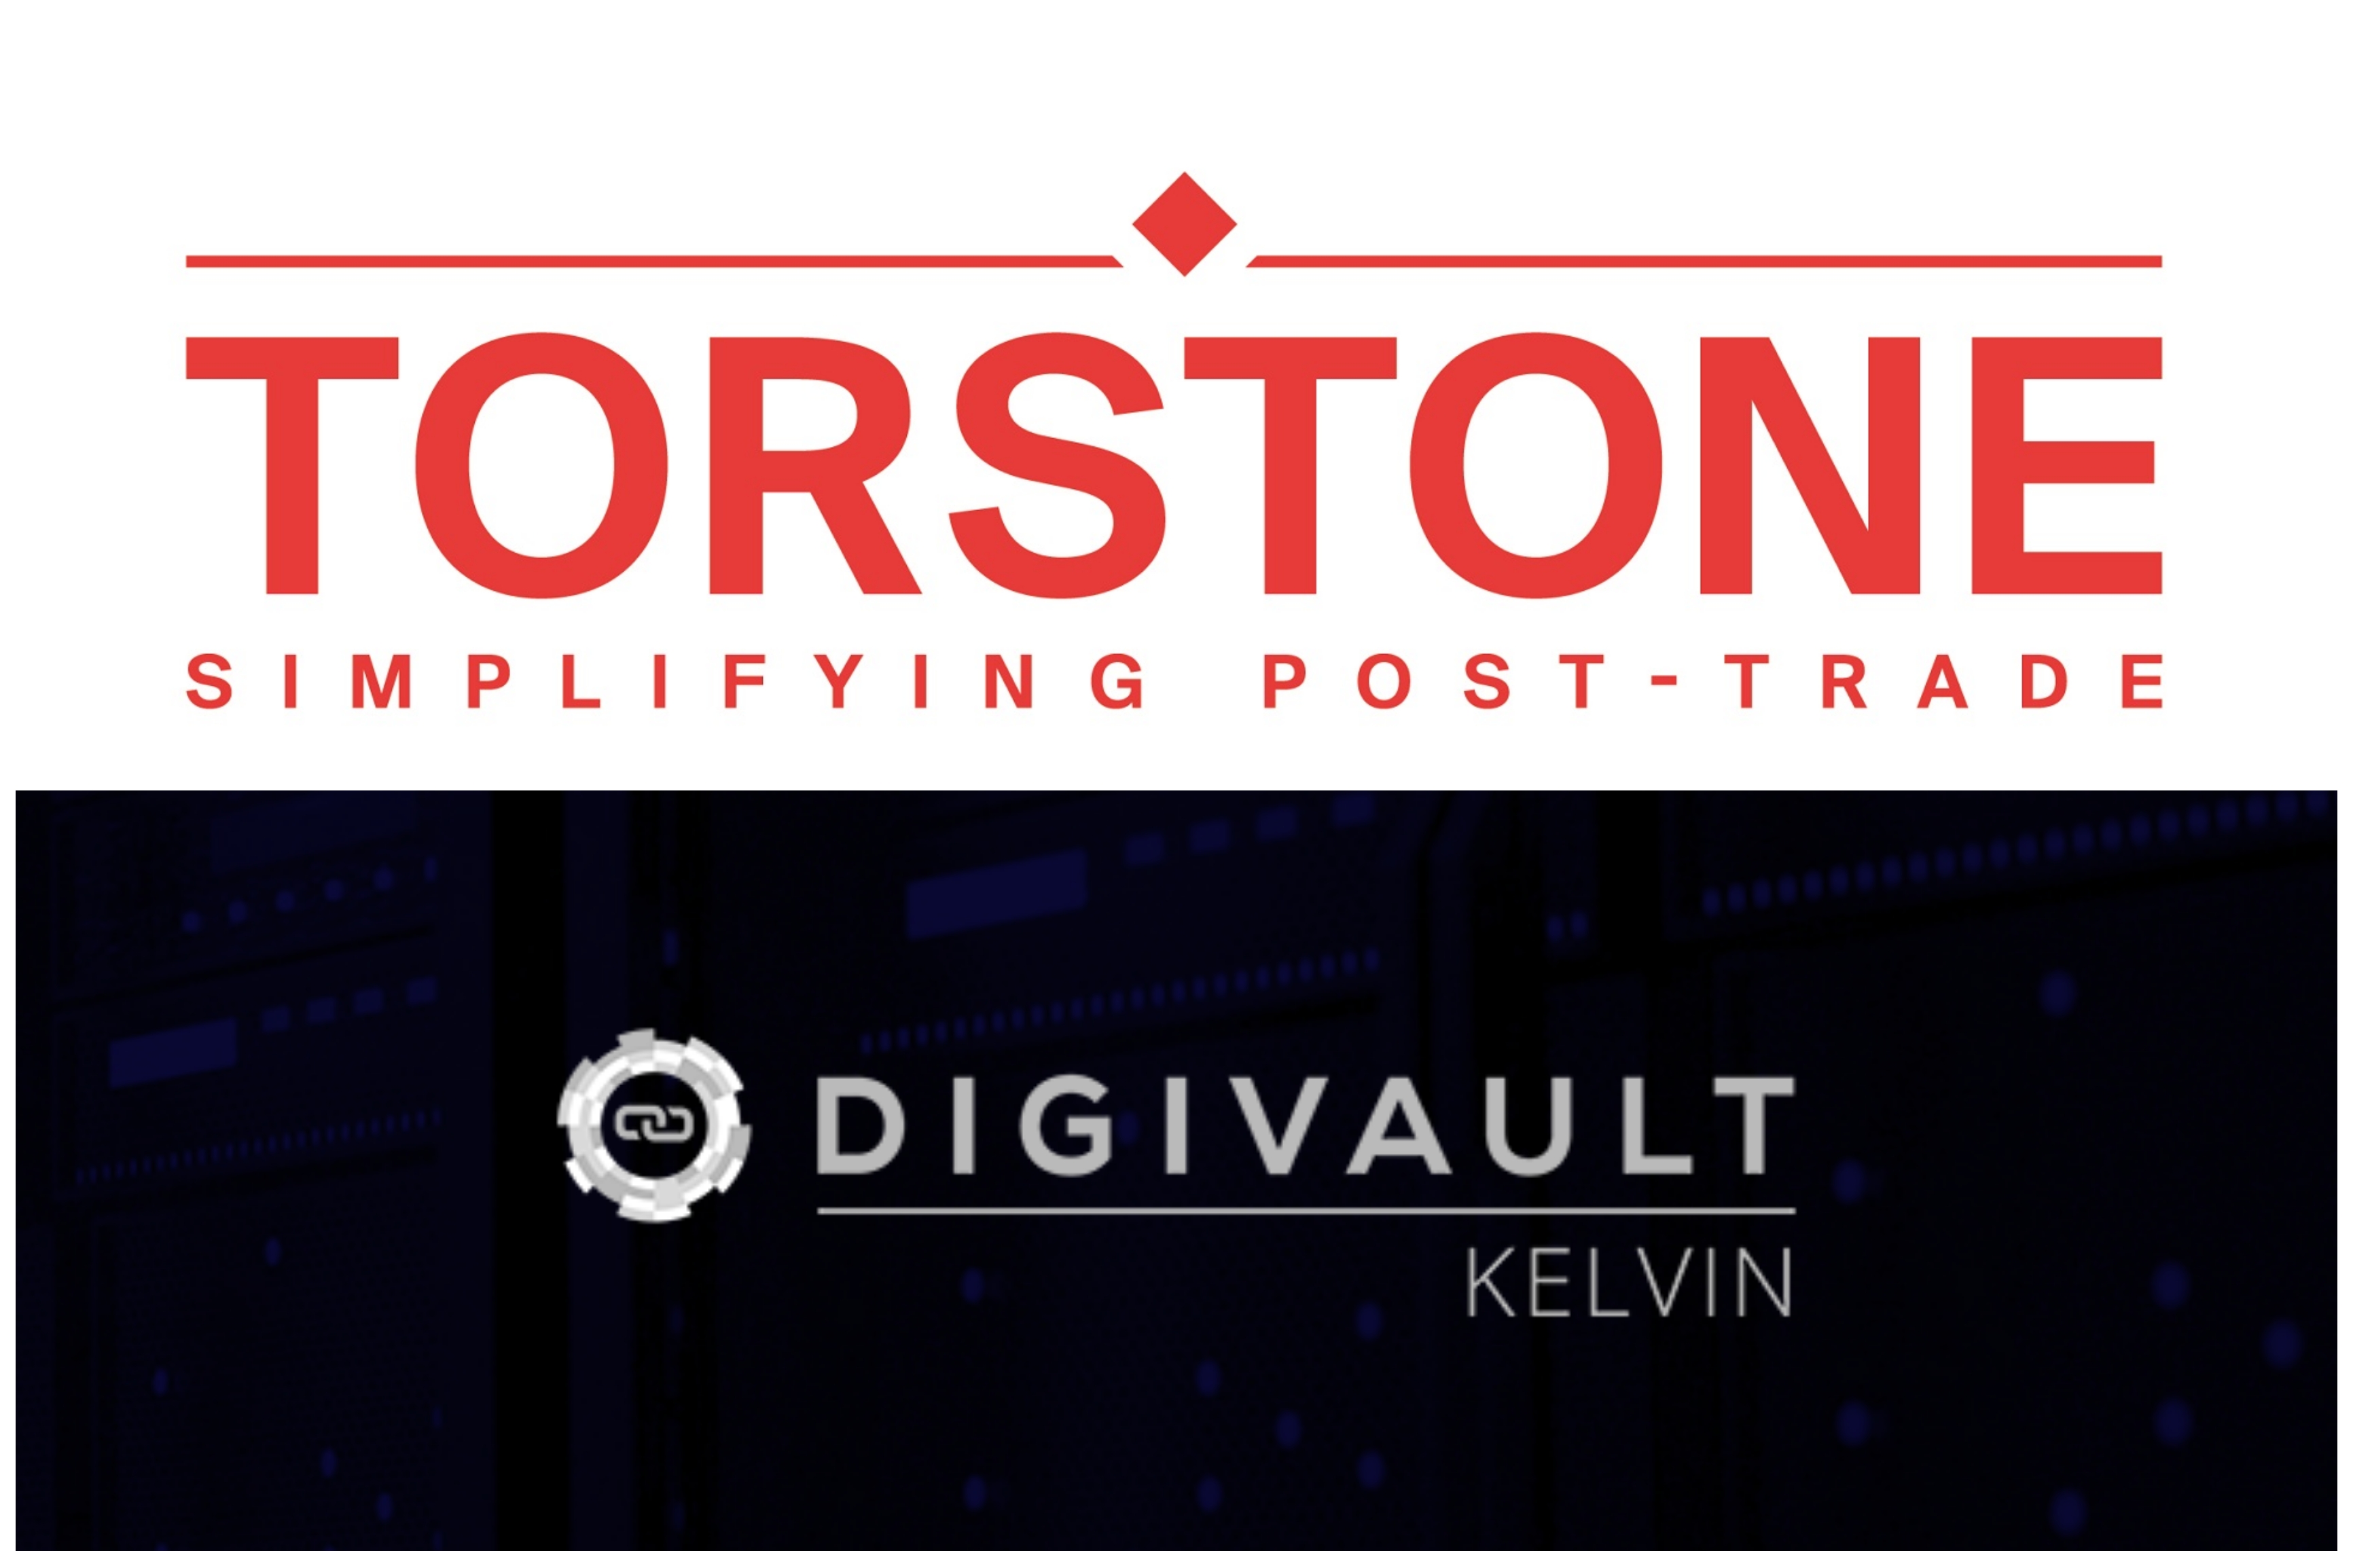 Torstone Technology And Digivault Partner To Enhance Post-trade Services For Digital Assets